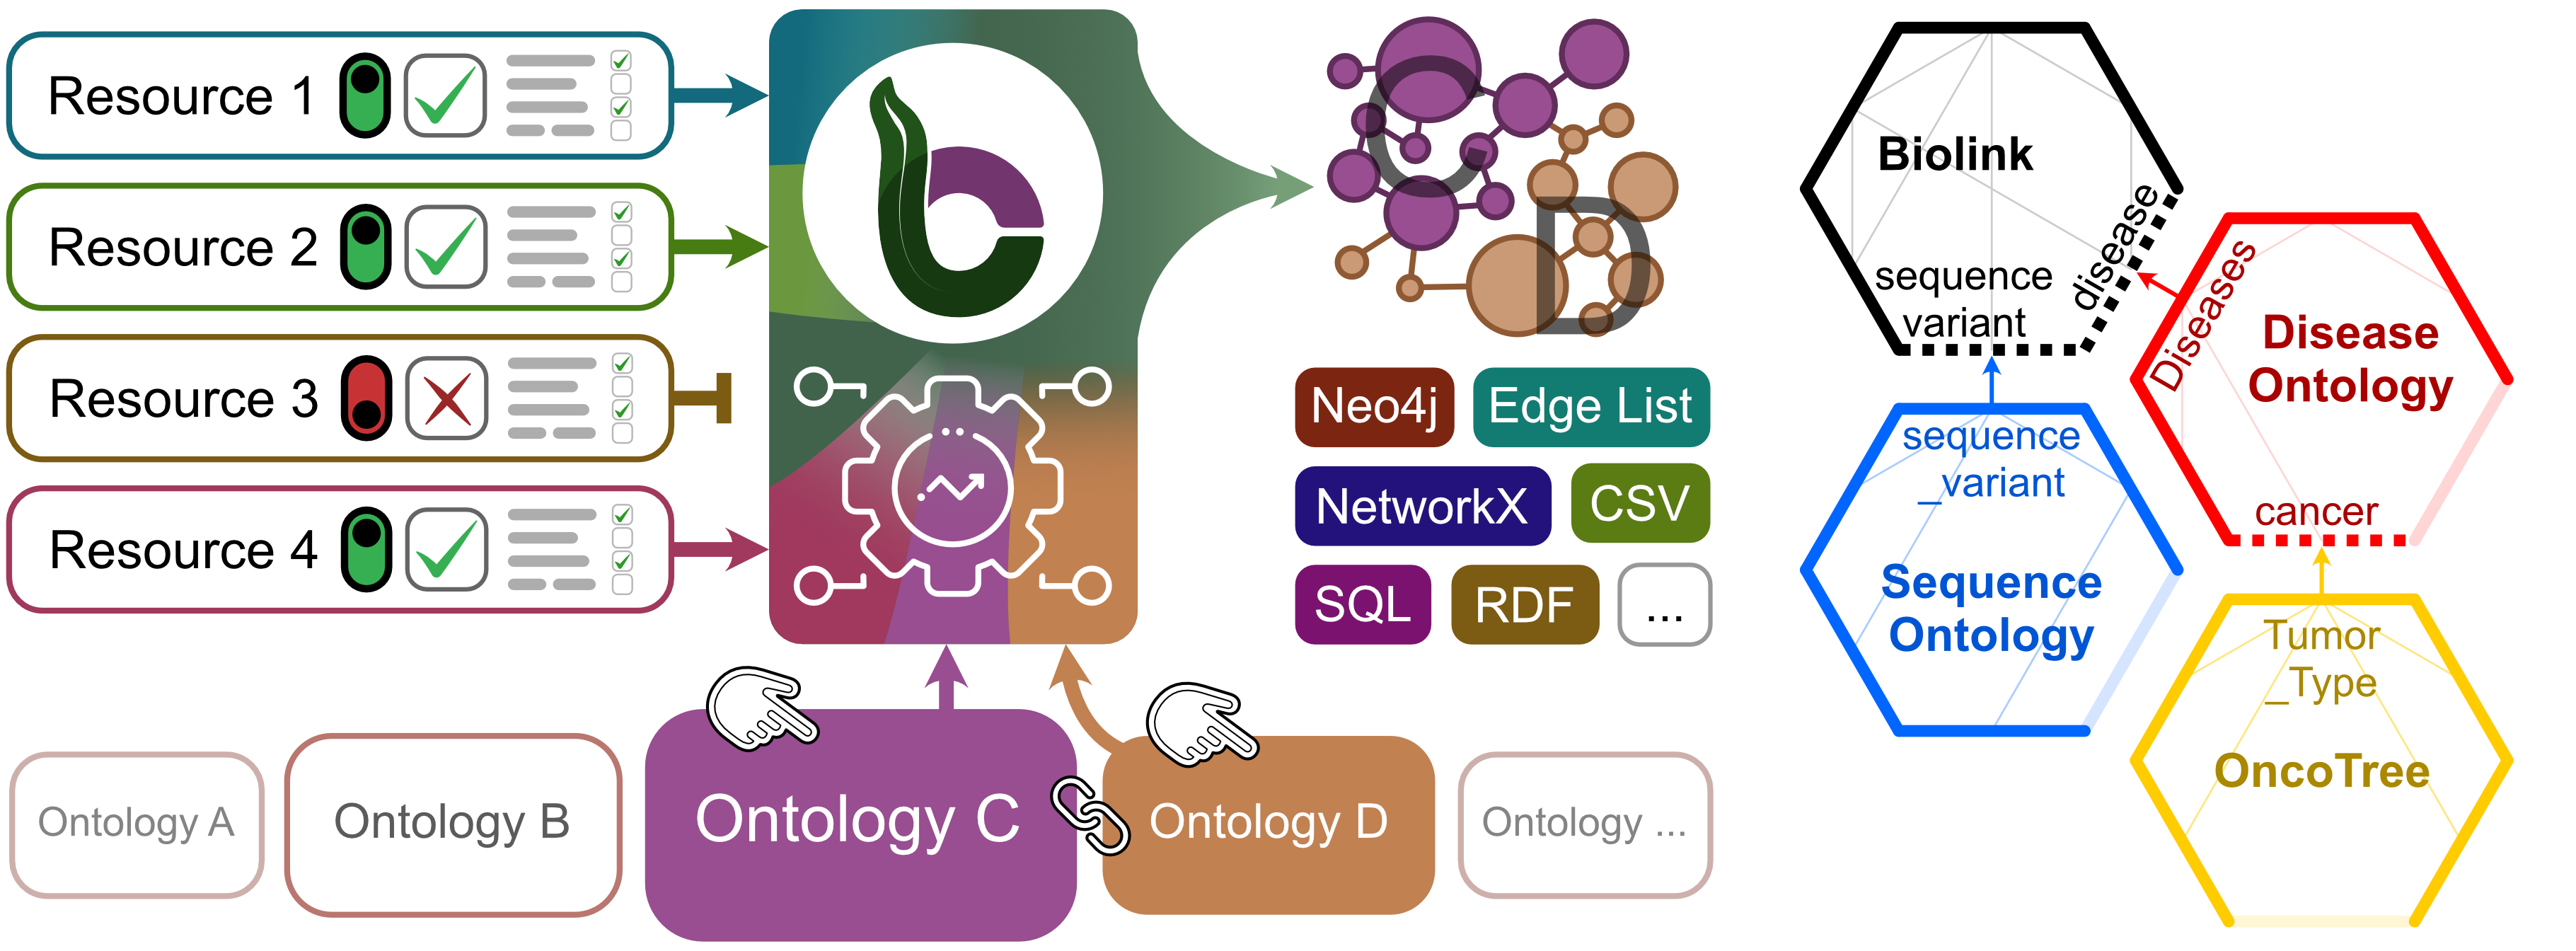 Figure 3: Modular ontology. BioCypher combines modular inputs from biomedical resources (left) with a flexible scaffold based on ontology (bottom) to build task-specific knowledge graphs (KGs) with variable format (middle). Users can configure the use of individual resources as well as the contents taken from these resources in a community-curated collection of adapters. The data are then harmonised on the basis of user-specified ontologies that are tailored to the specific purpose of the desired KG, using BioCypher’s mapping, extension, and hybridisation facilities. Finally, the KG is provided to the user through an output adapter in the desired format. Since Biolink has a broad but general representation of biomedical classes, we extend the “sequence variant” with the corresponding granular information from the specialised Sequence Ontology (right side). Similarly, information about cancer and specific tumour types are added from Disease Ontology and OncoTree.